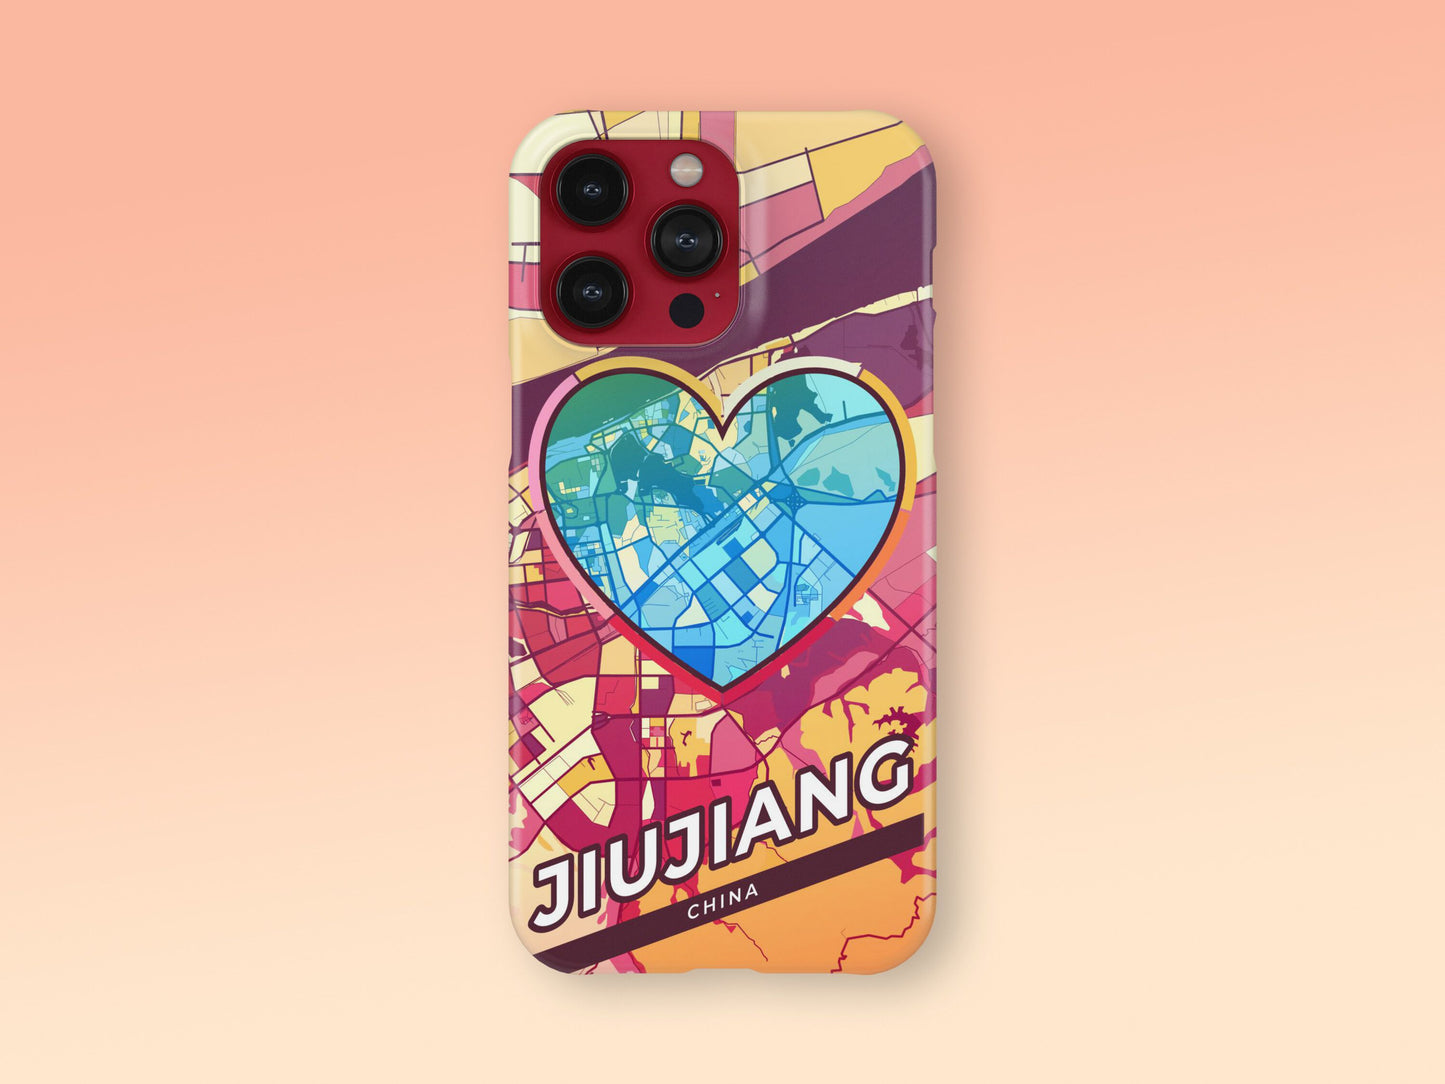 Jiujiang China slim phone case with colorful icon. Birthday, wedding or housewarming gift. Couple match cases. 2